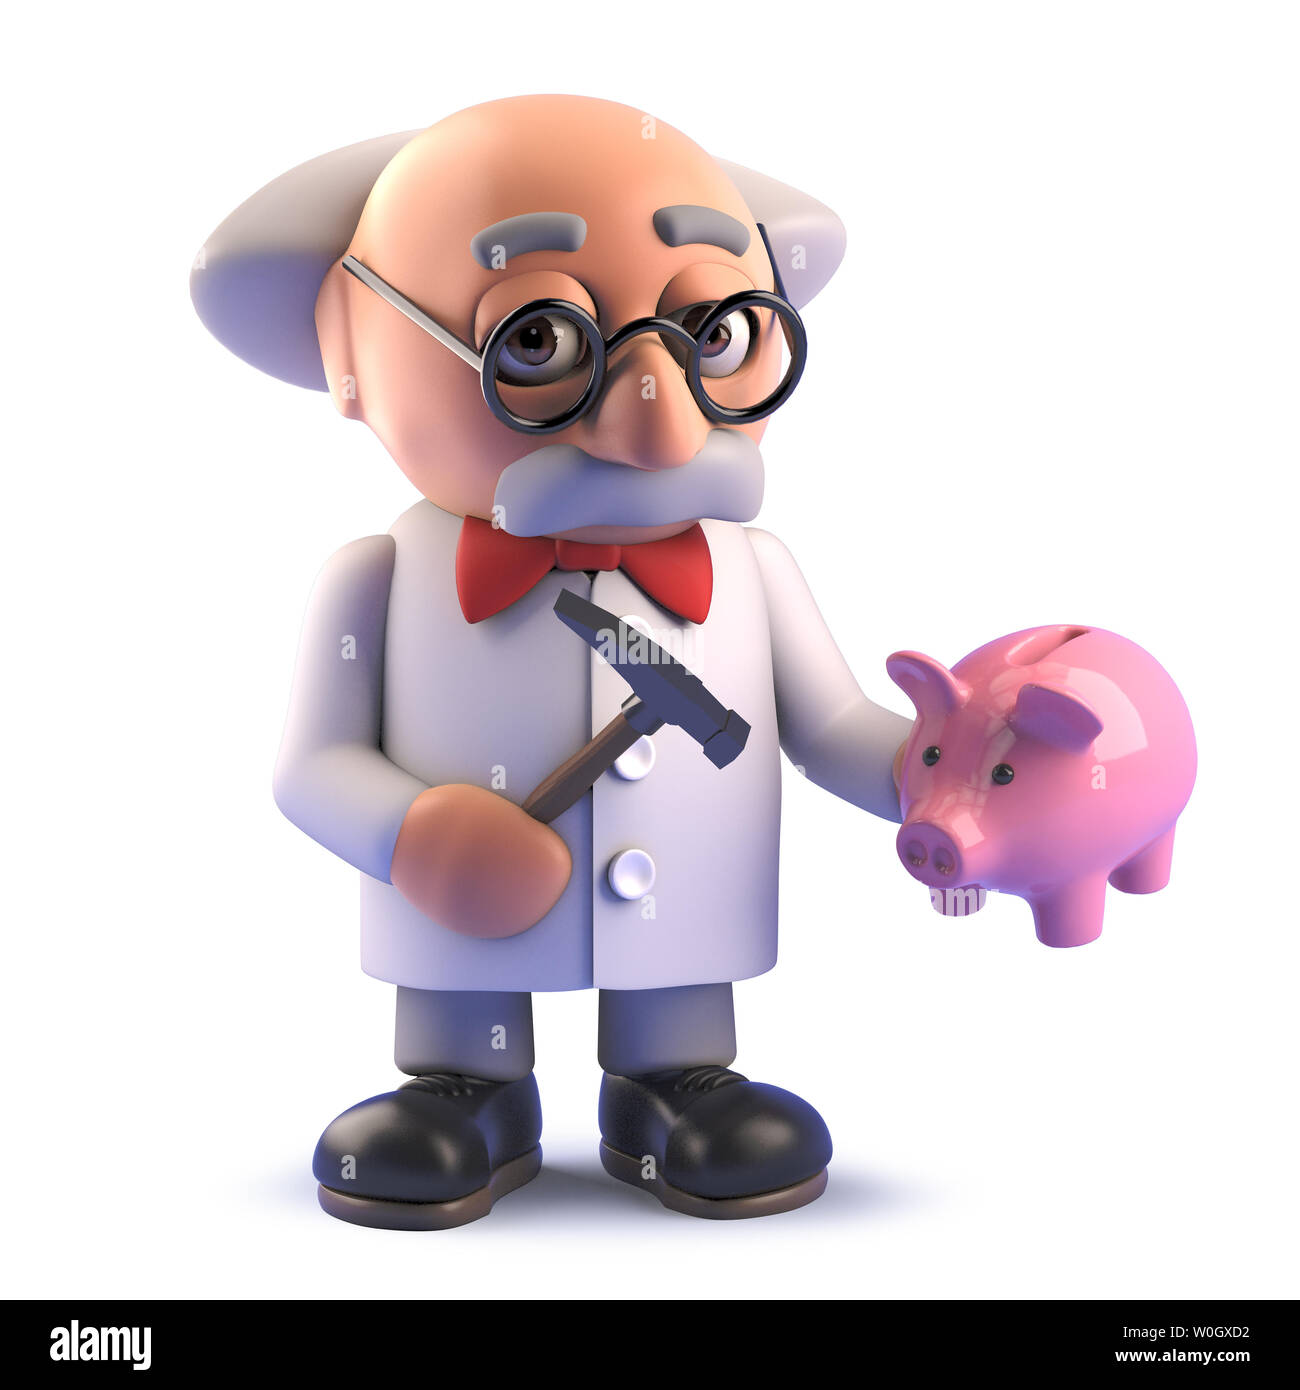 Rendered image of a cartoon mad scientist professor ready to smash his piggy bank, 3d illustration Stock Photo